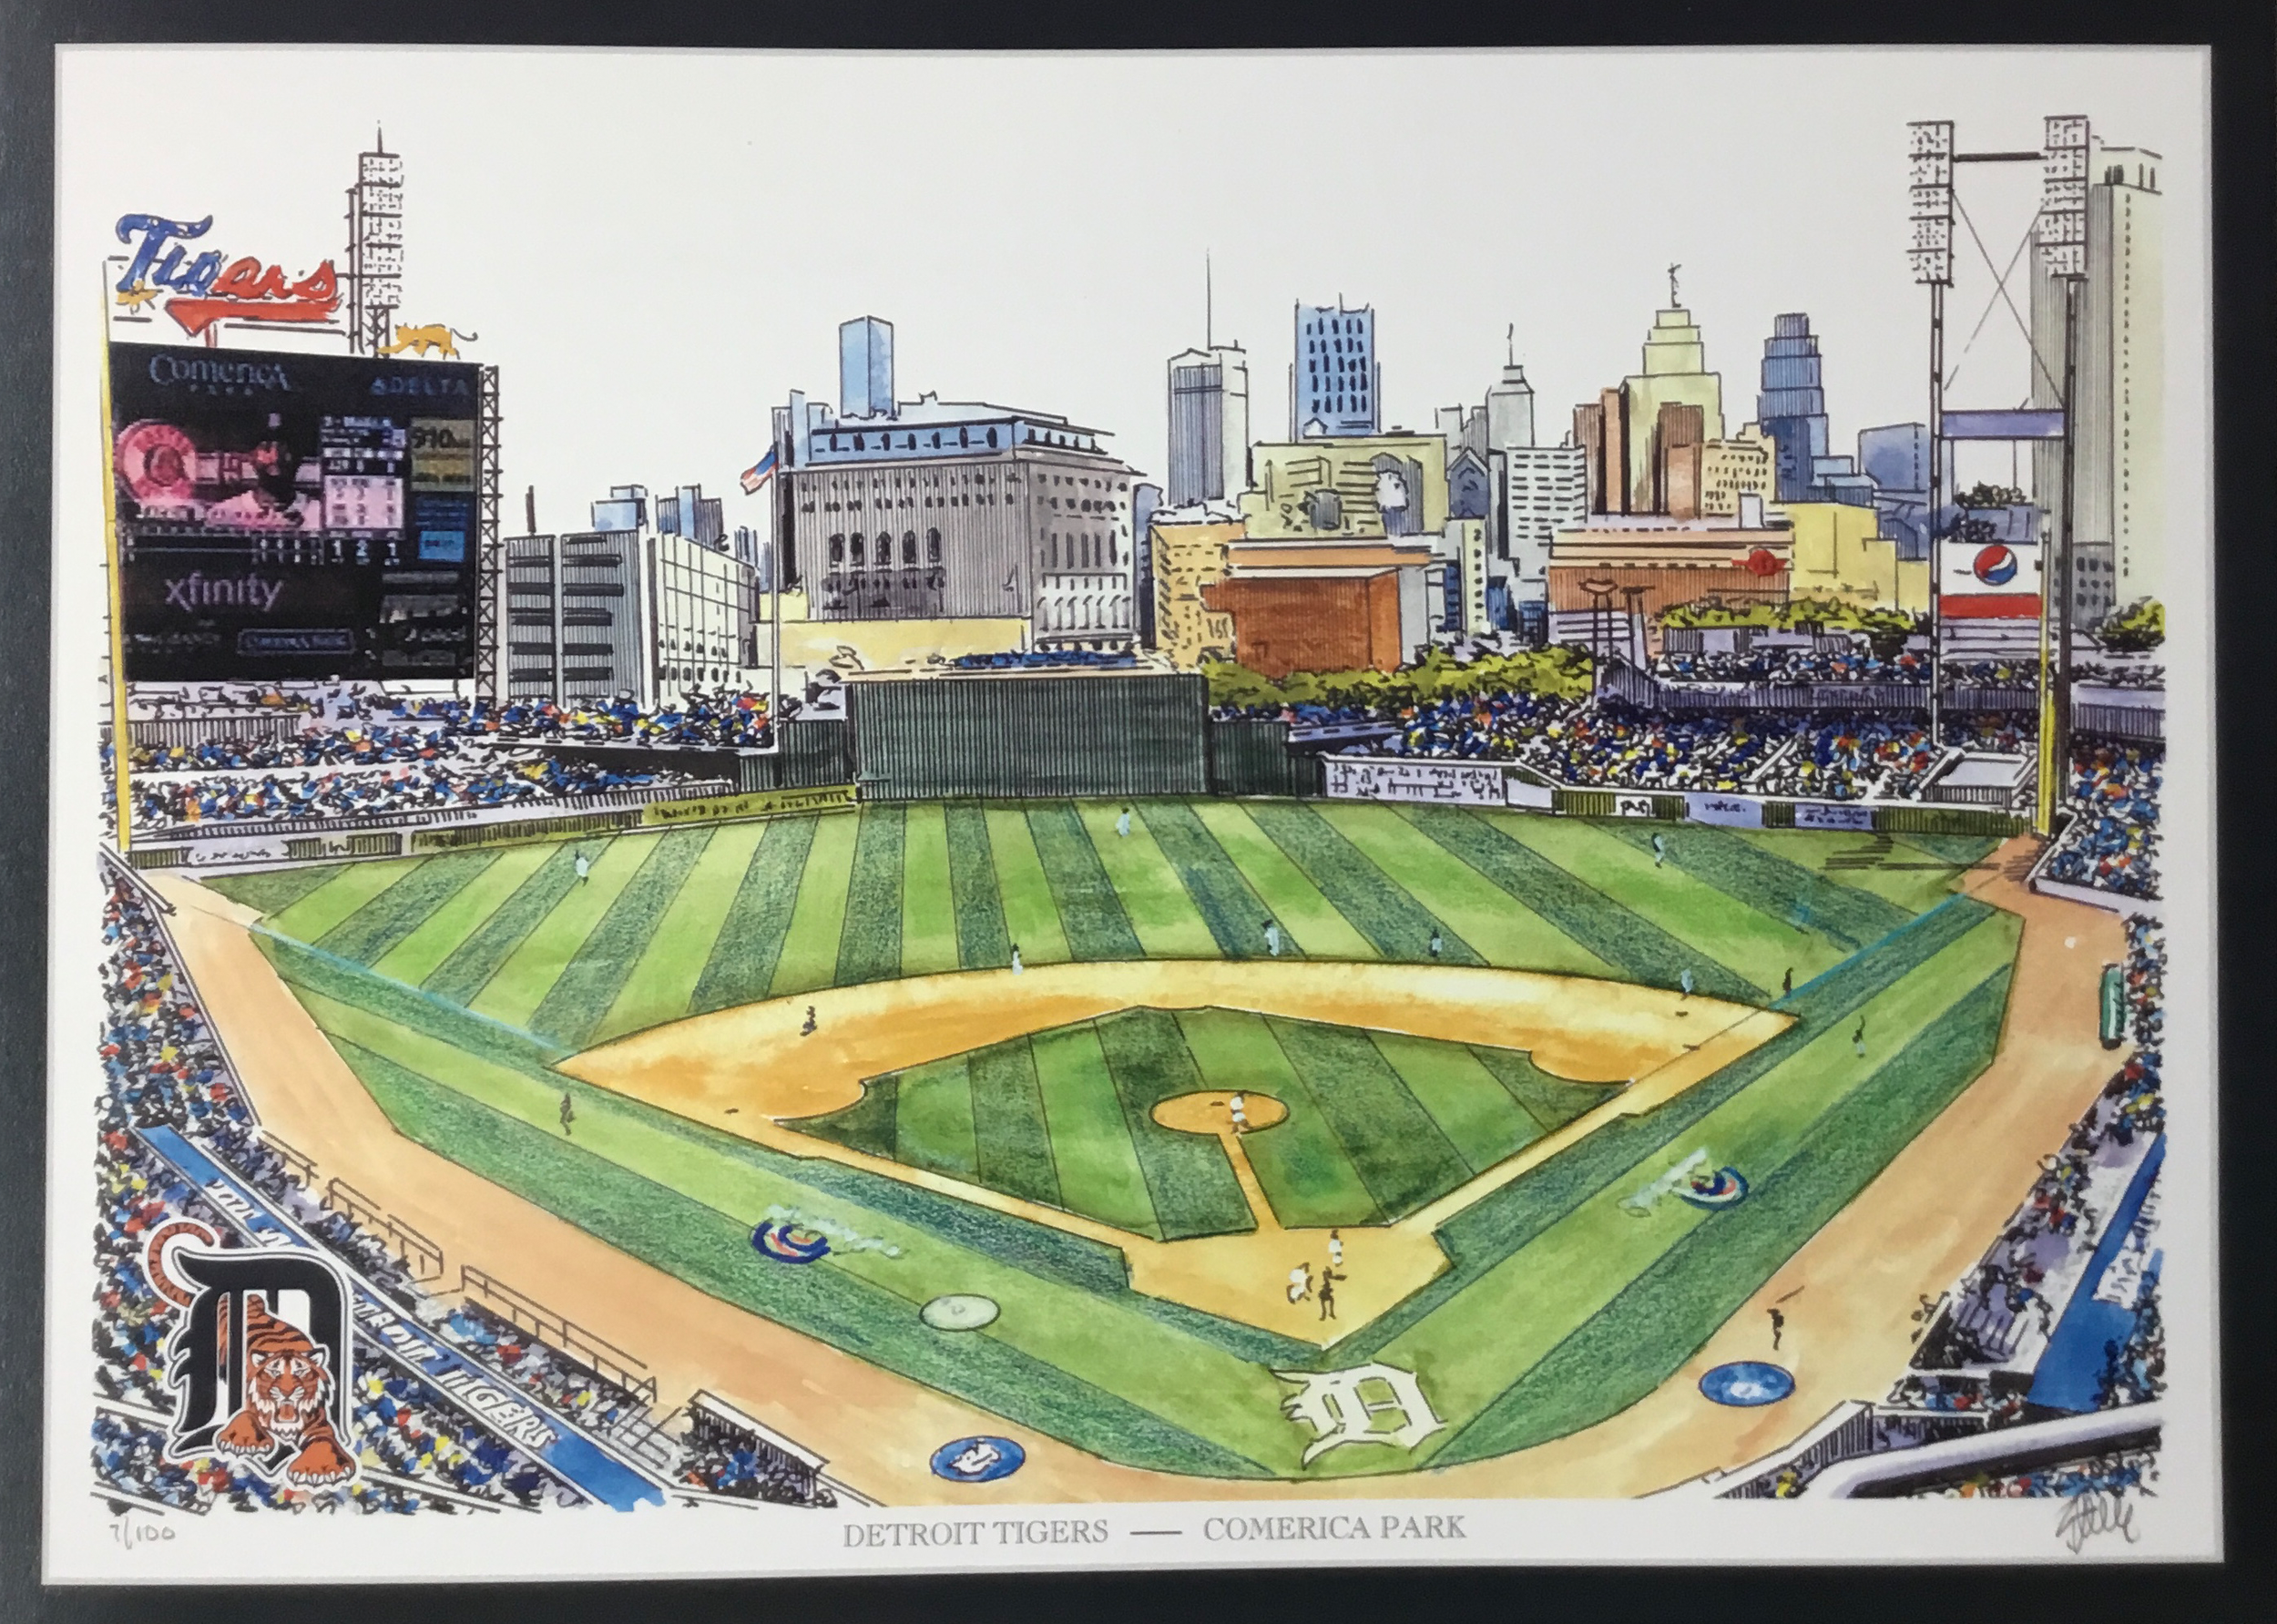 Detroit Tigers – Comerica Park LIMITED EDITION Art Print by John